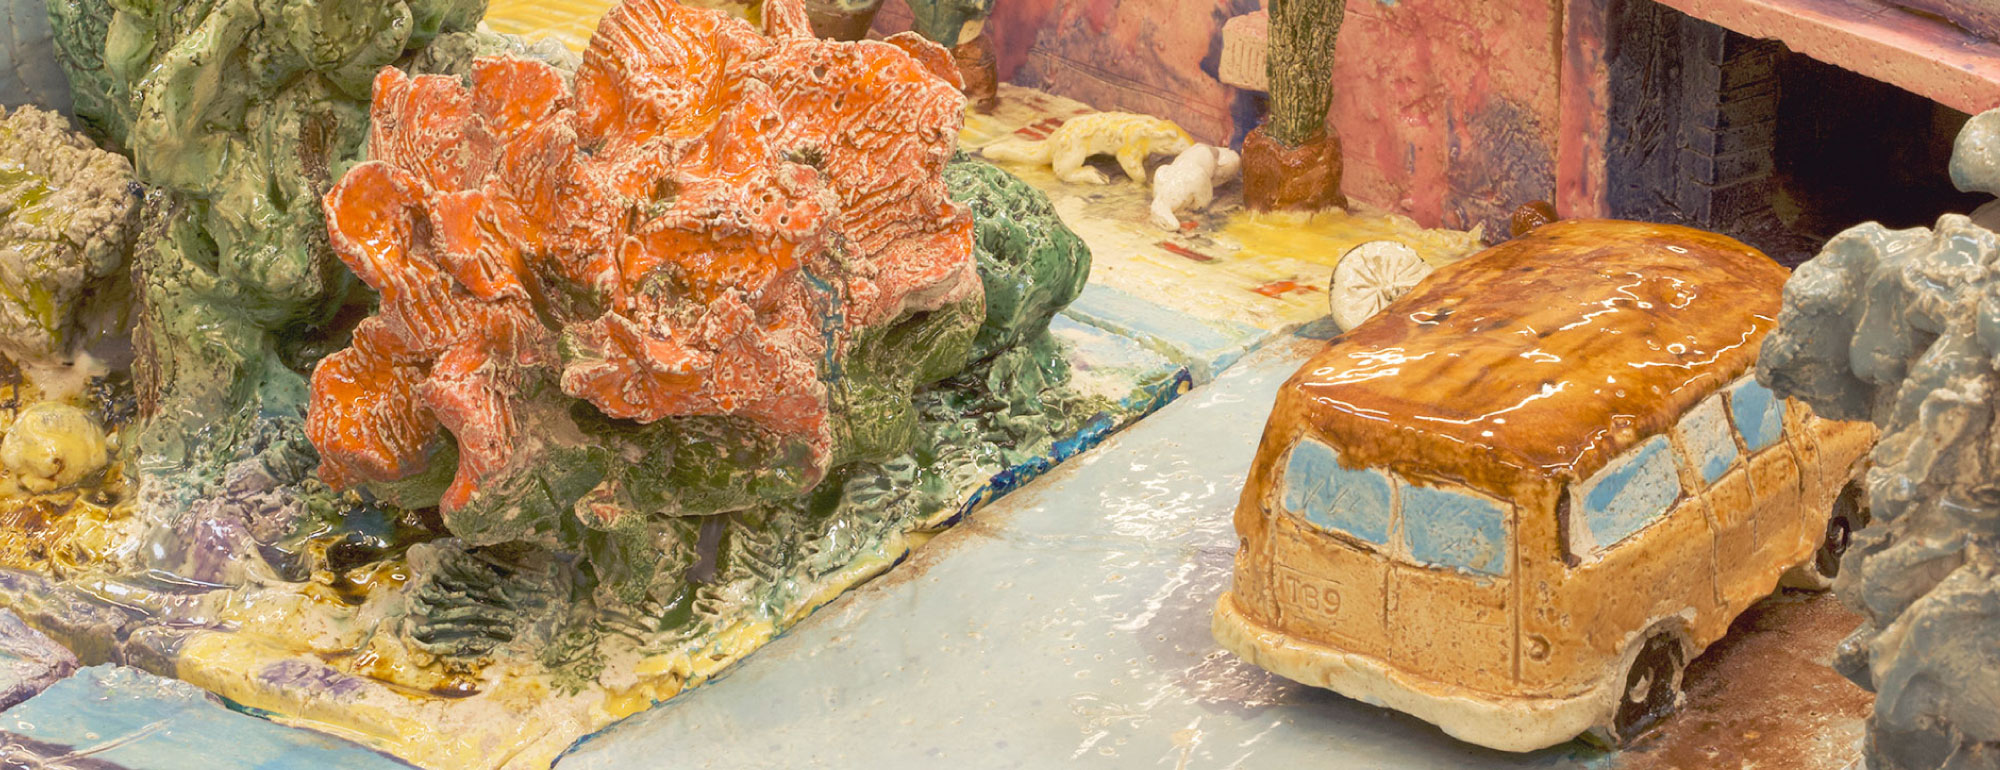 Detail of ceramic sculpture of a house showing the garage with a tan van parked in the driveway.